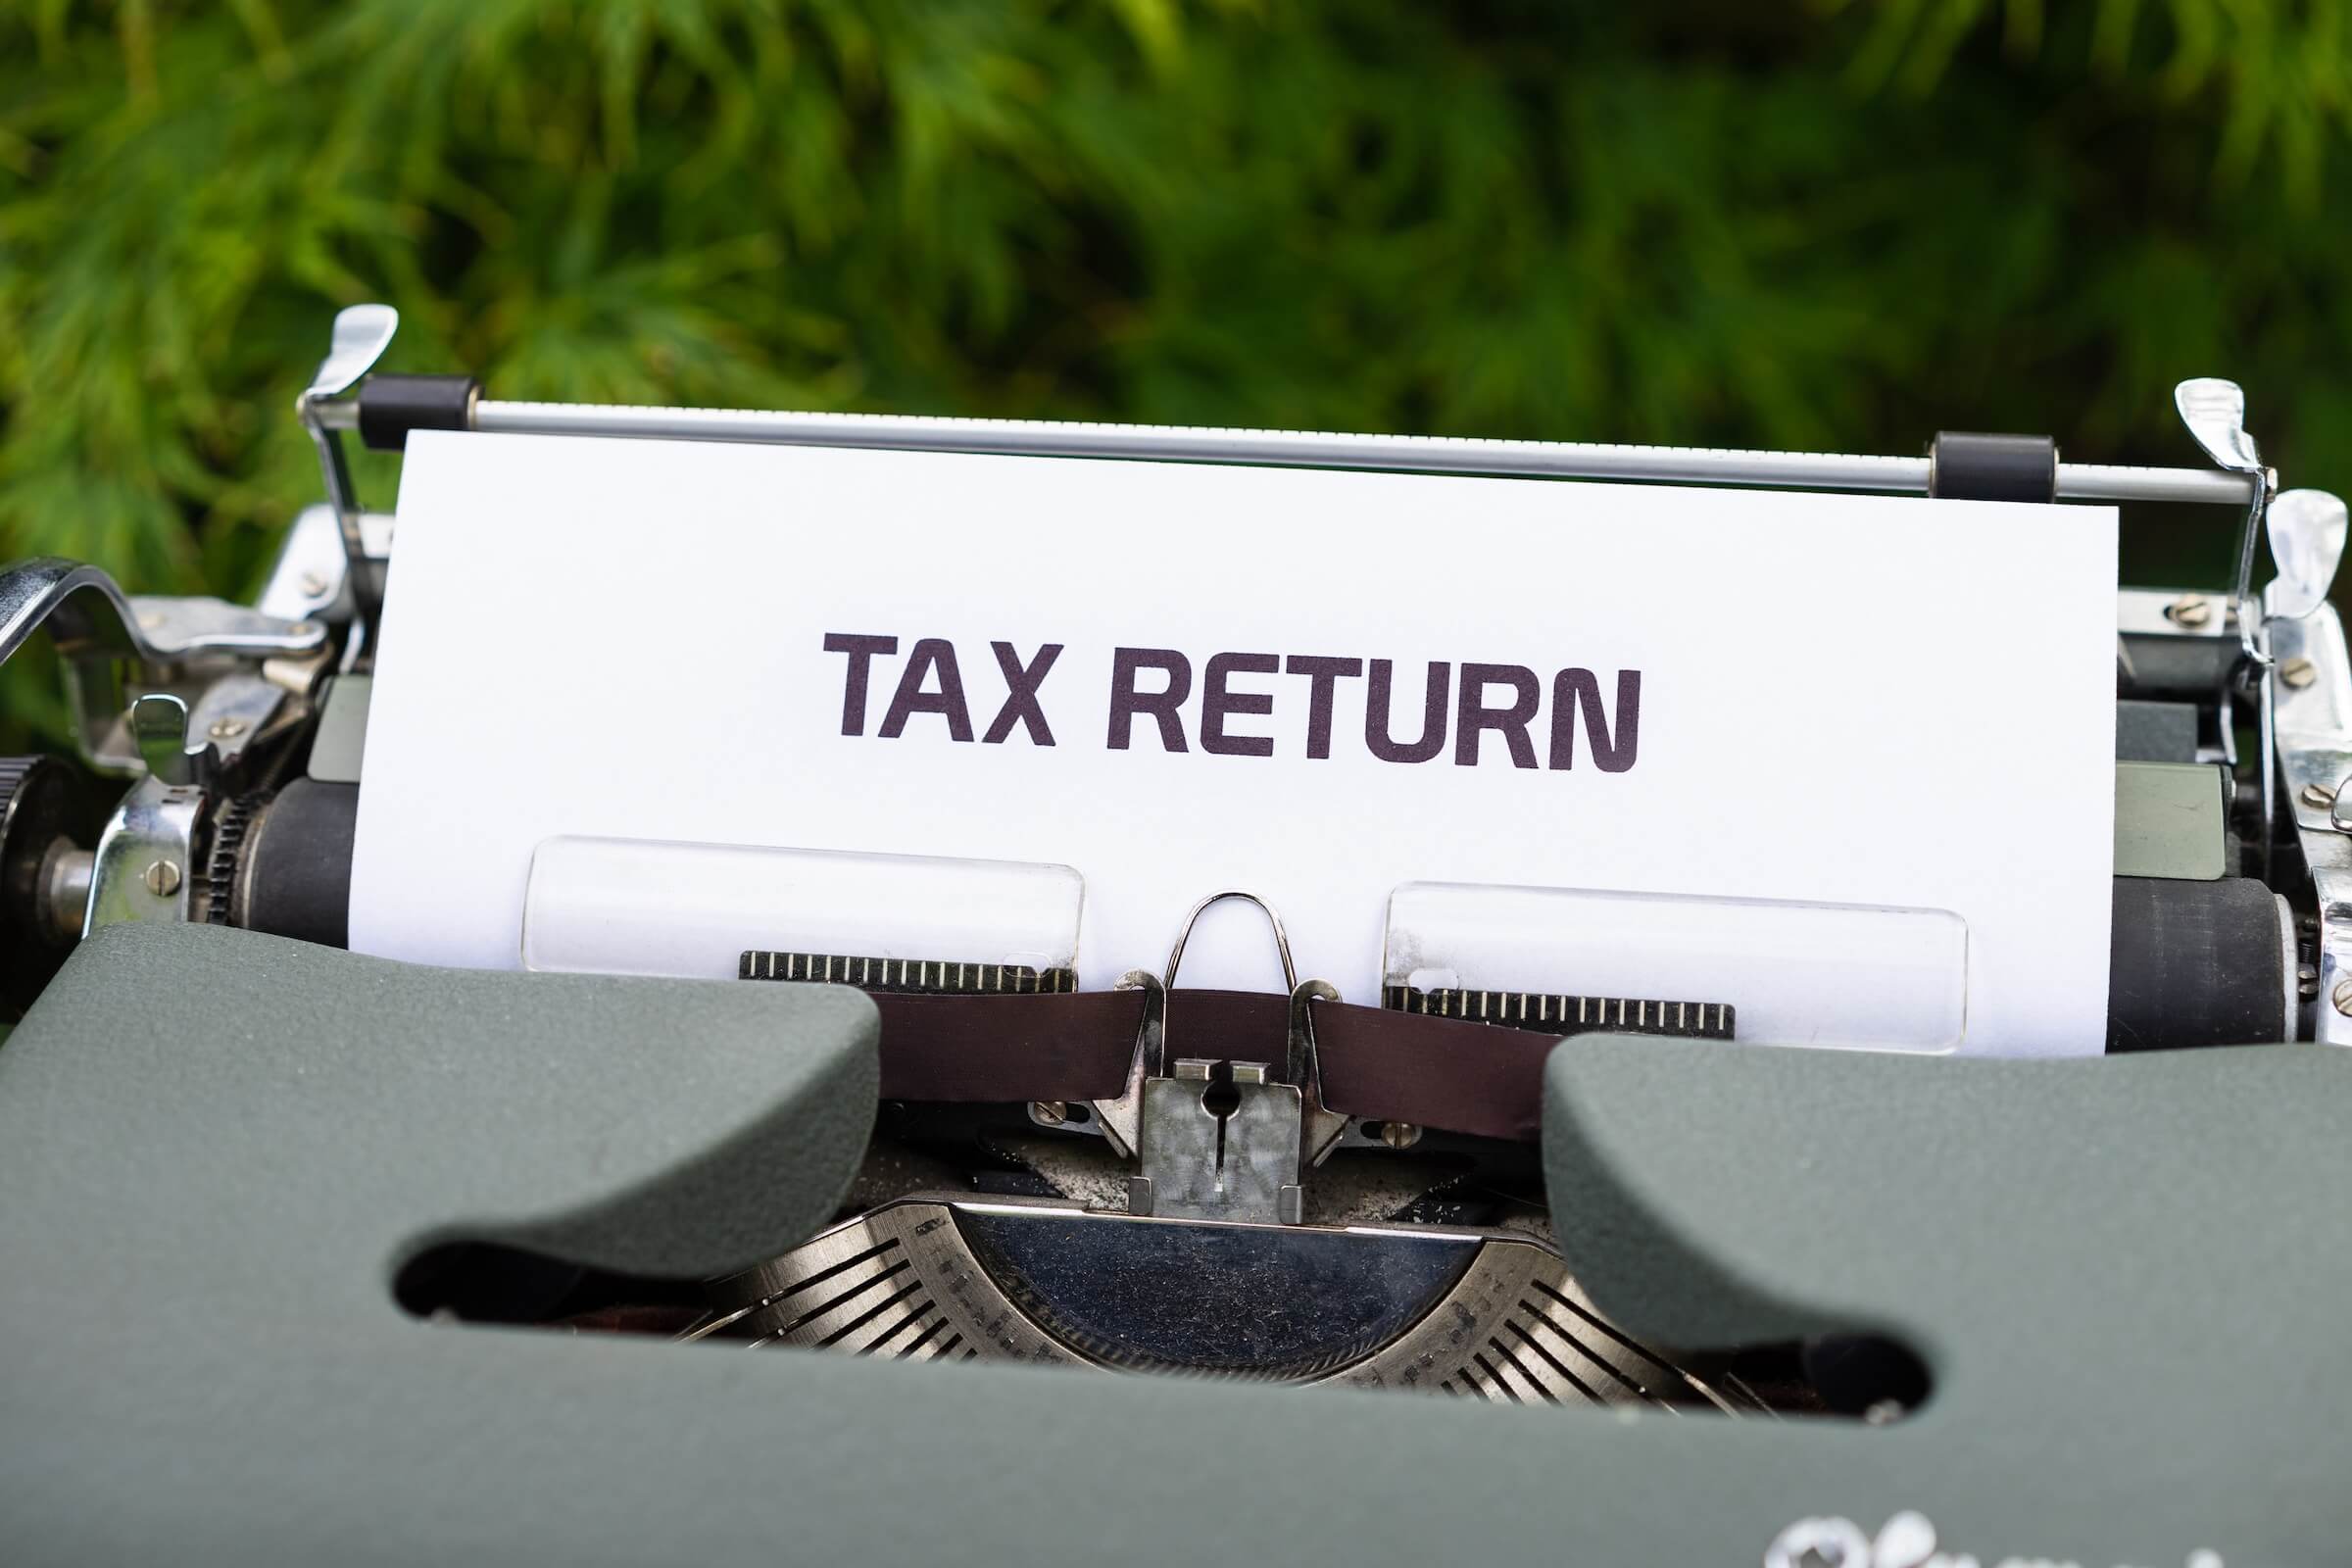 ATO Urges Aussies to Avoid Submitting "Half-baked" Tax Return